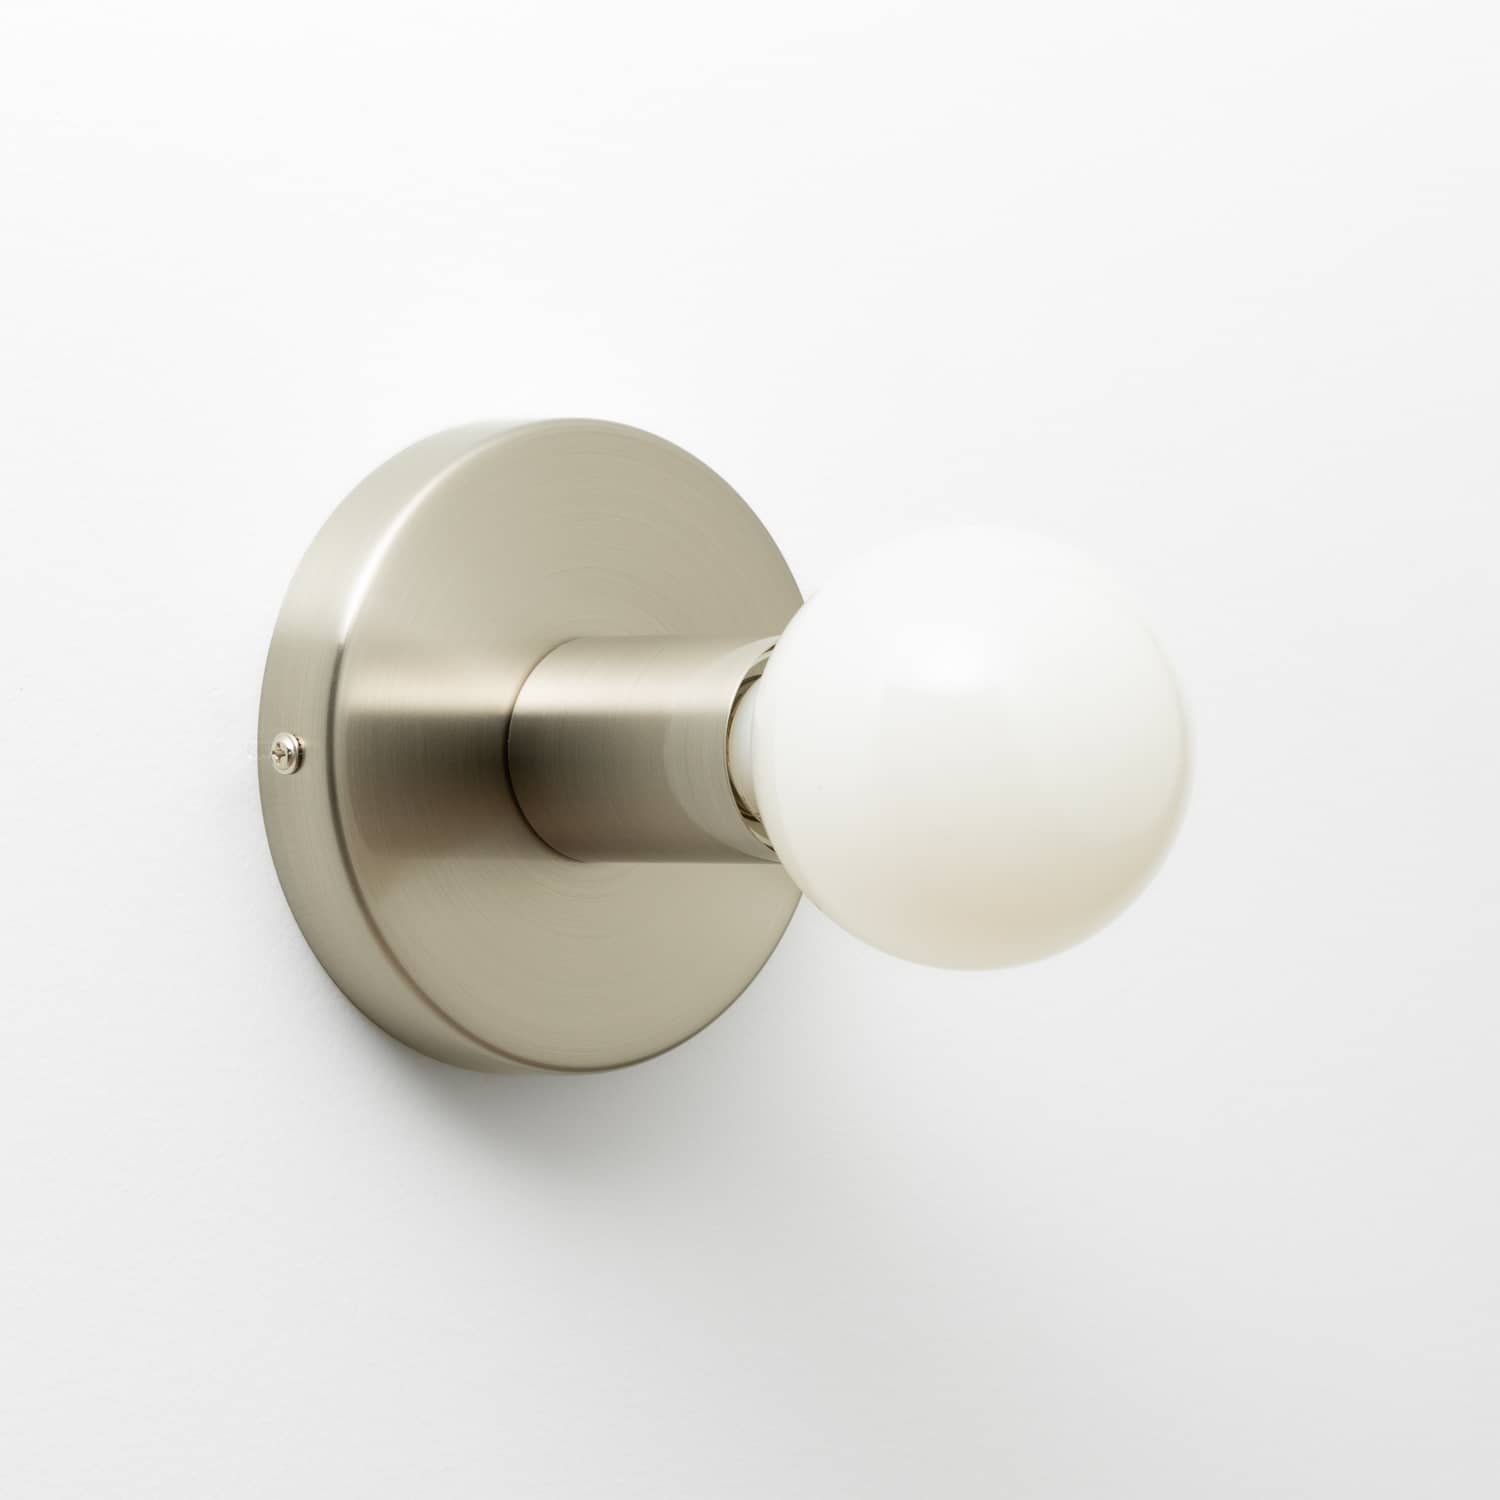 Button Light in Brushed Nickel finish pictured with G25 milk glass light bulb